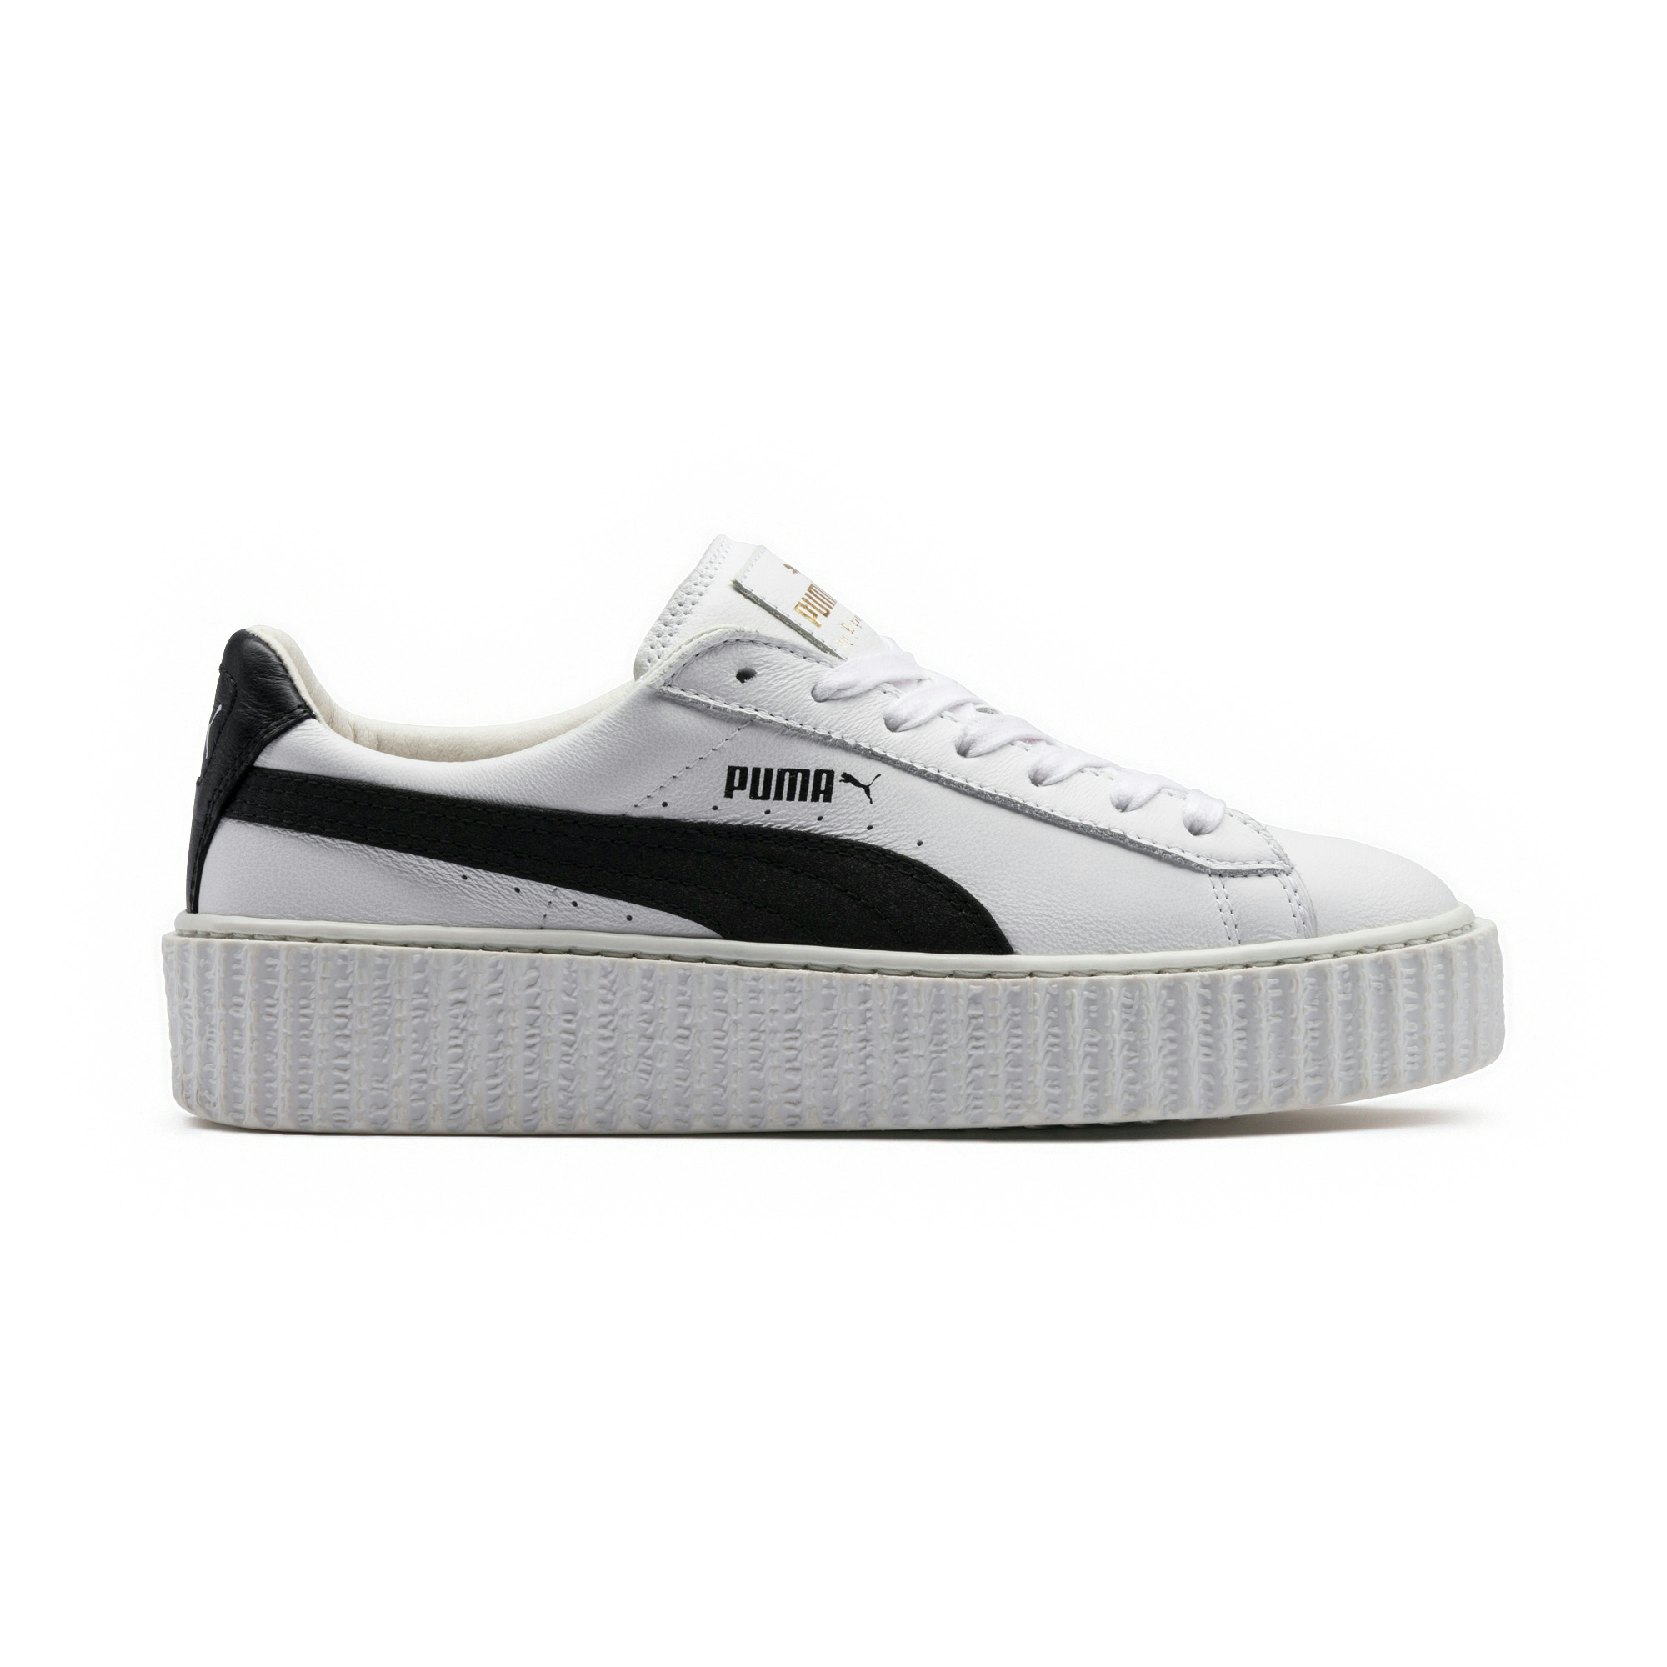 are puma creepers true to size